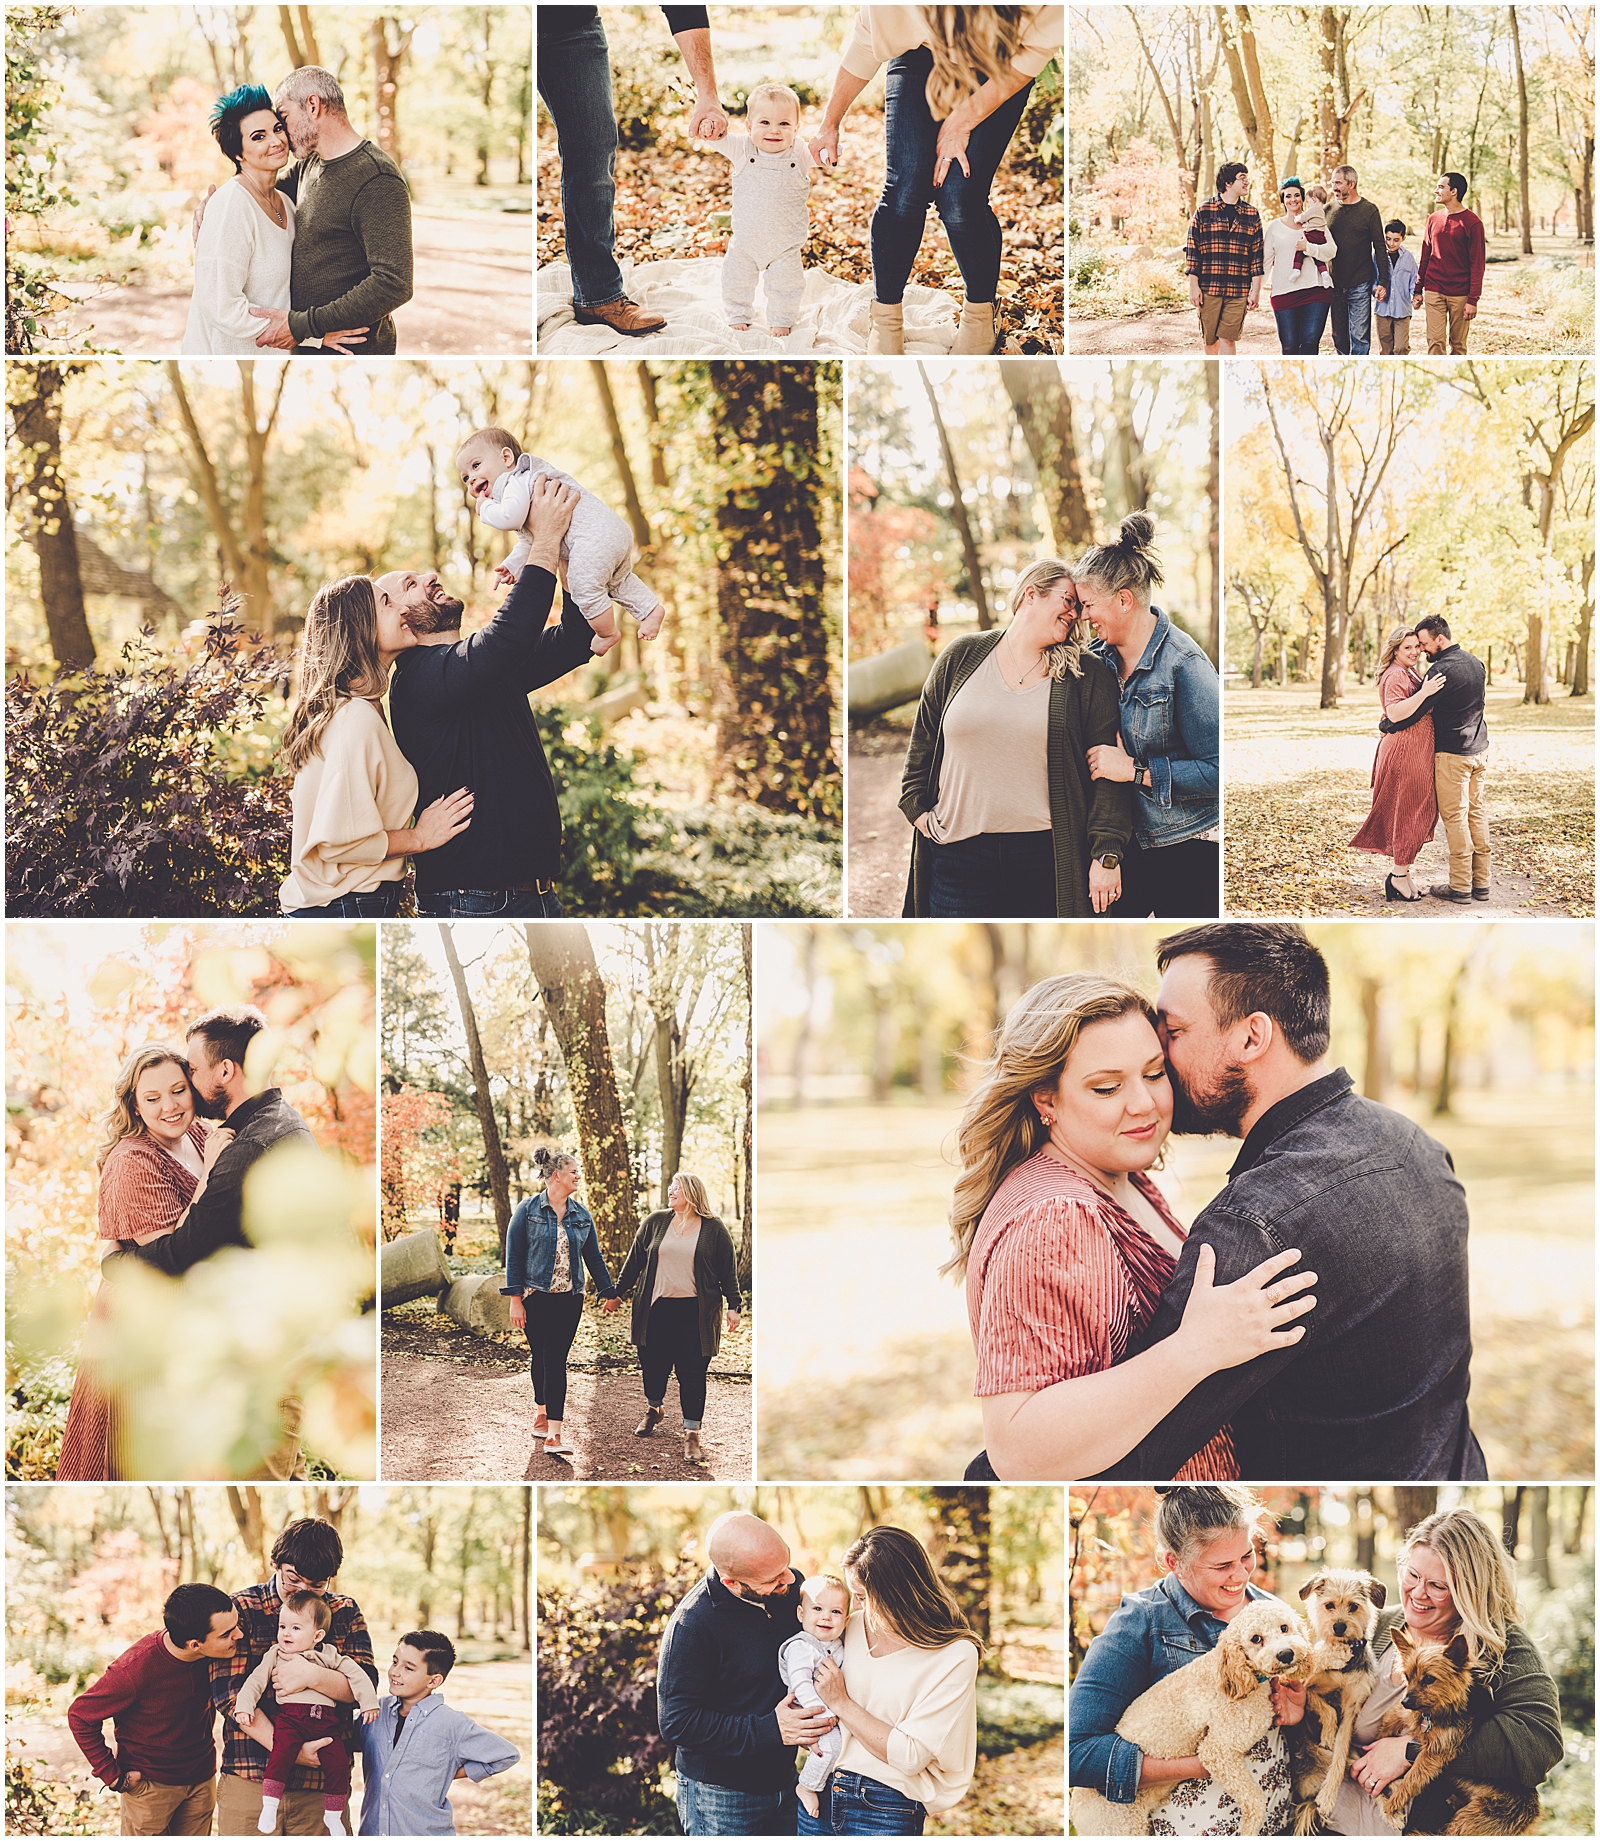 Fall mini session photos at Governor Small Memorial Park in Kankakee, Illinois with Chicagoland wedding photographer Kara Evans Photographer.